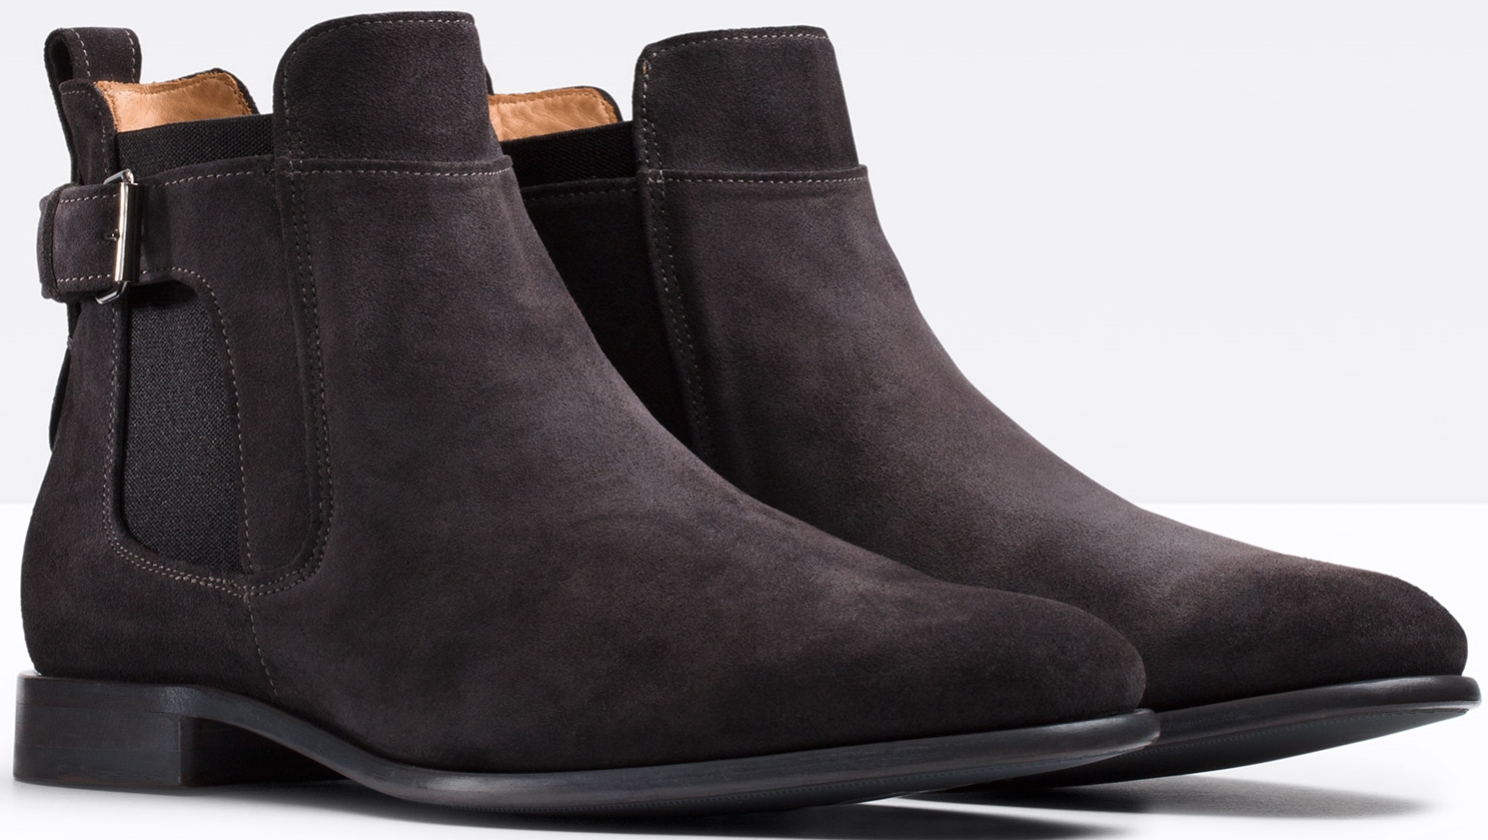 VINCE Aston Sport Suede Boot, $495